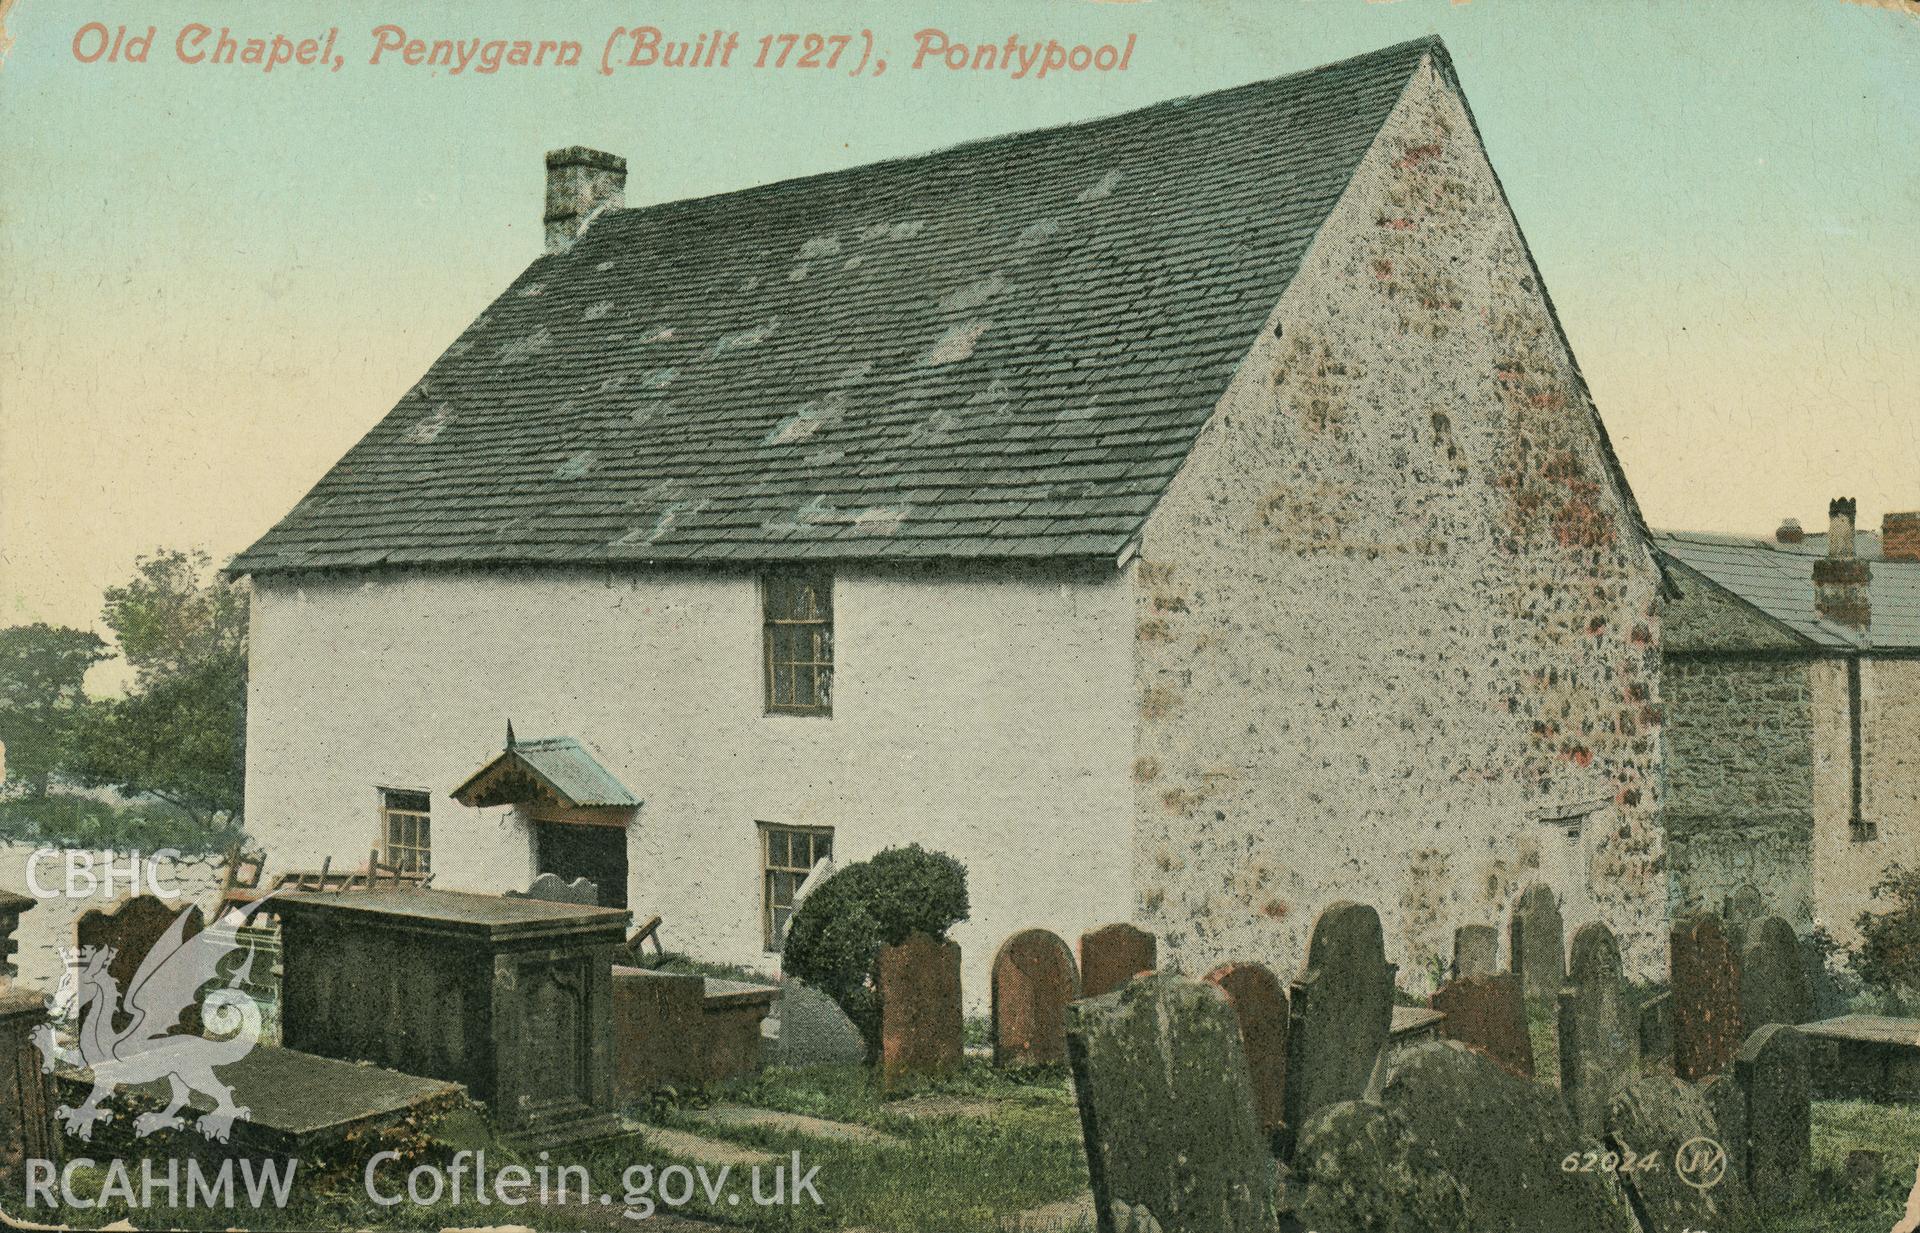 Digital copy of colour postcard showing exterior view of Penygarn Baptist chapel, Penygarn Road, Pontypool. Postcard part of 'Valentine's Series: Famous Throughout the World.' Loaned for copying by Thomas Lloyd.